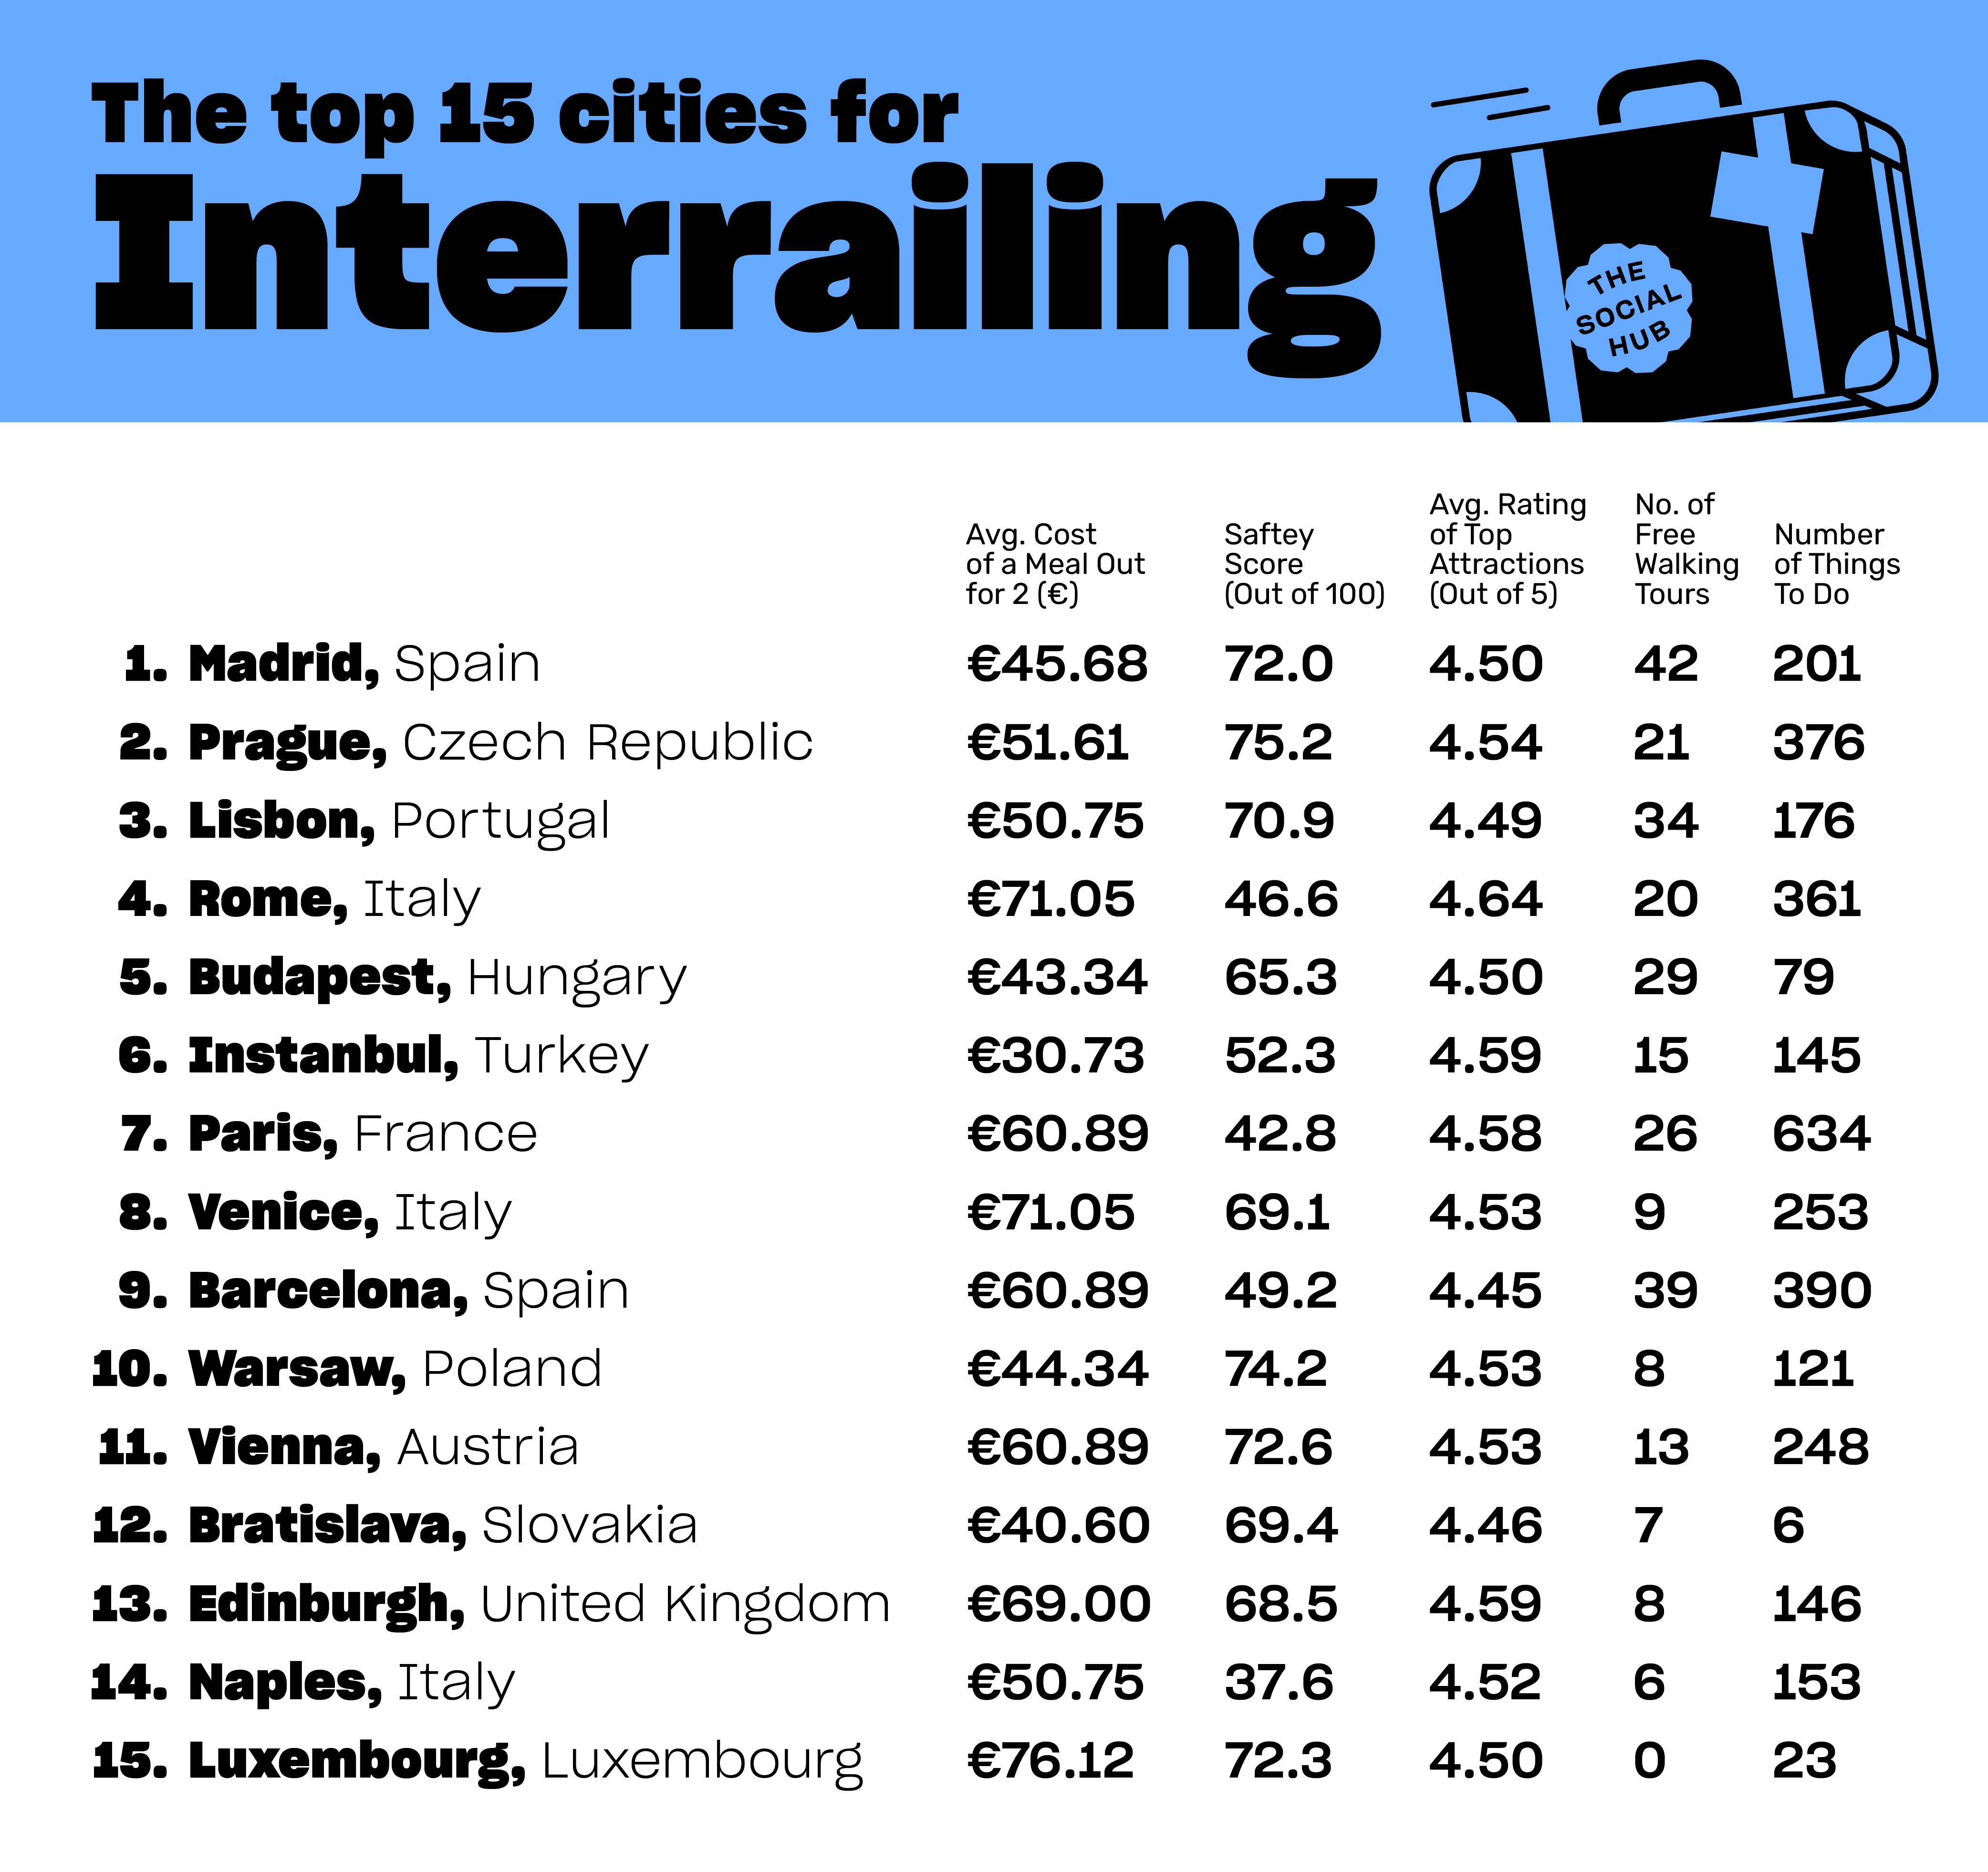 List of the top 15 cities for interrailing based on metrics such as Average cost of a meal out, safety score, average rating of top attractions, number of free walking tours and number of things do.